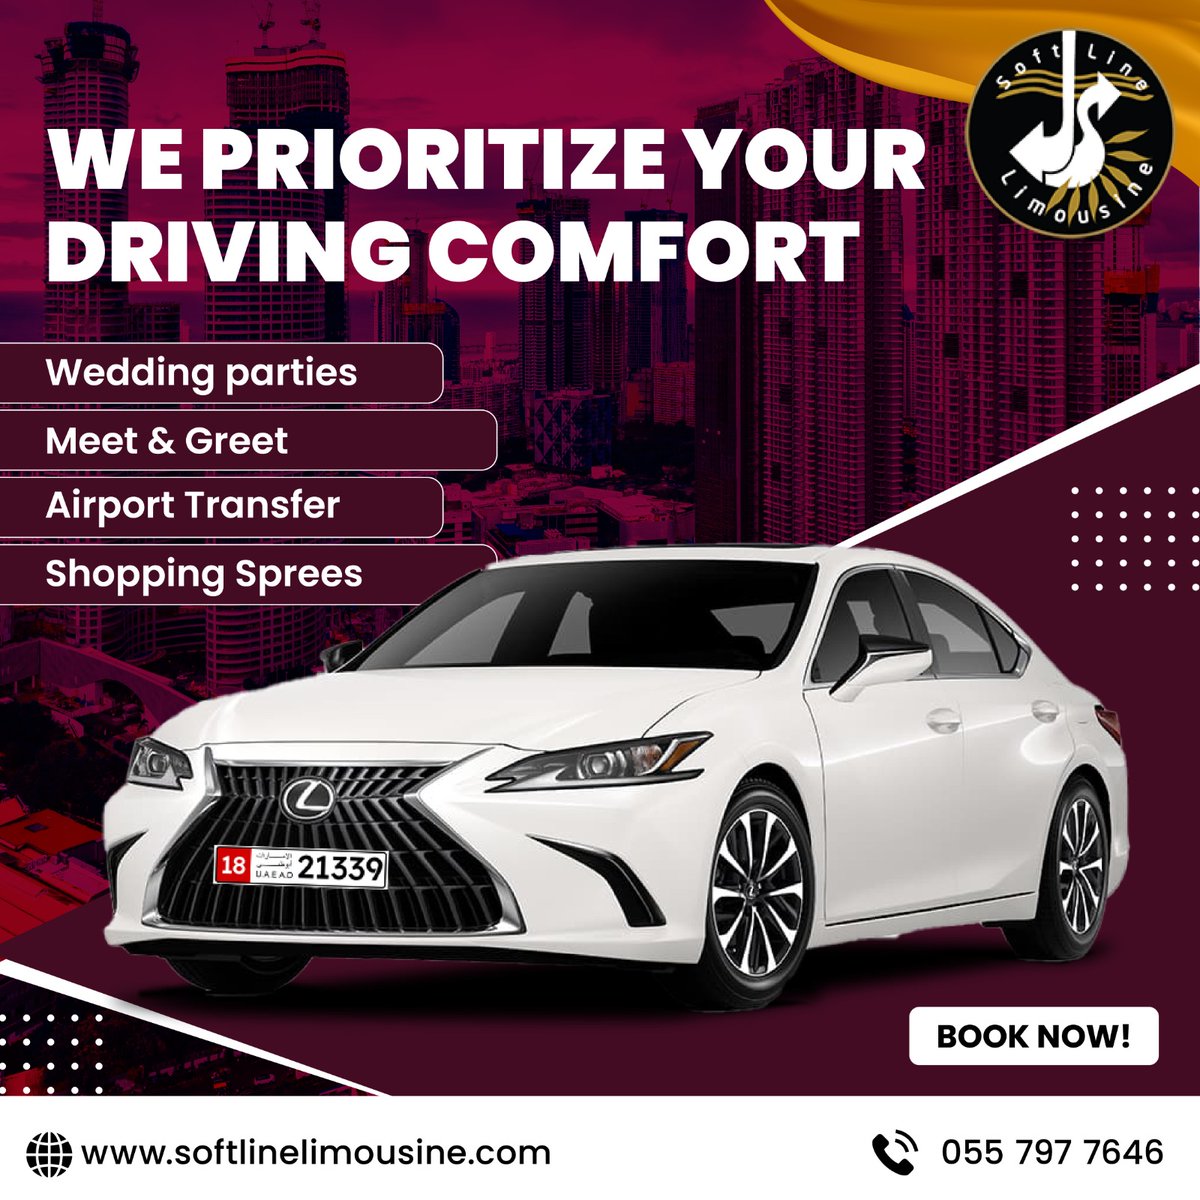 We Prioritize your Driving Comfort

✅ Wedding parties
✅ Meet & Greet
✅ Airport Transfer
✅ Shopping Sprees

Call us🤙: +971 050 2370637, 055 7977646 (WhatsApp) 👇👇
Book your ride now at softlinelimousine.com/our-fleets.php

#comfortdriving #airporttransfer #nextride #taxiservices #airport